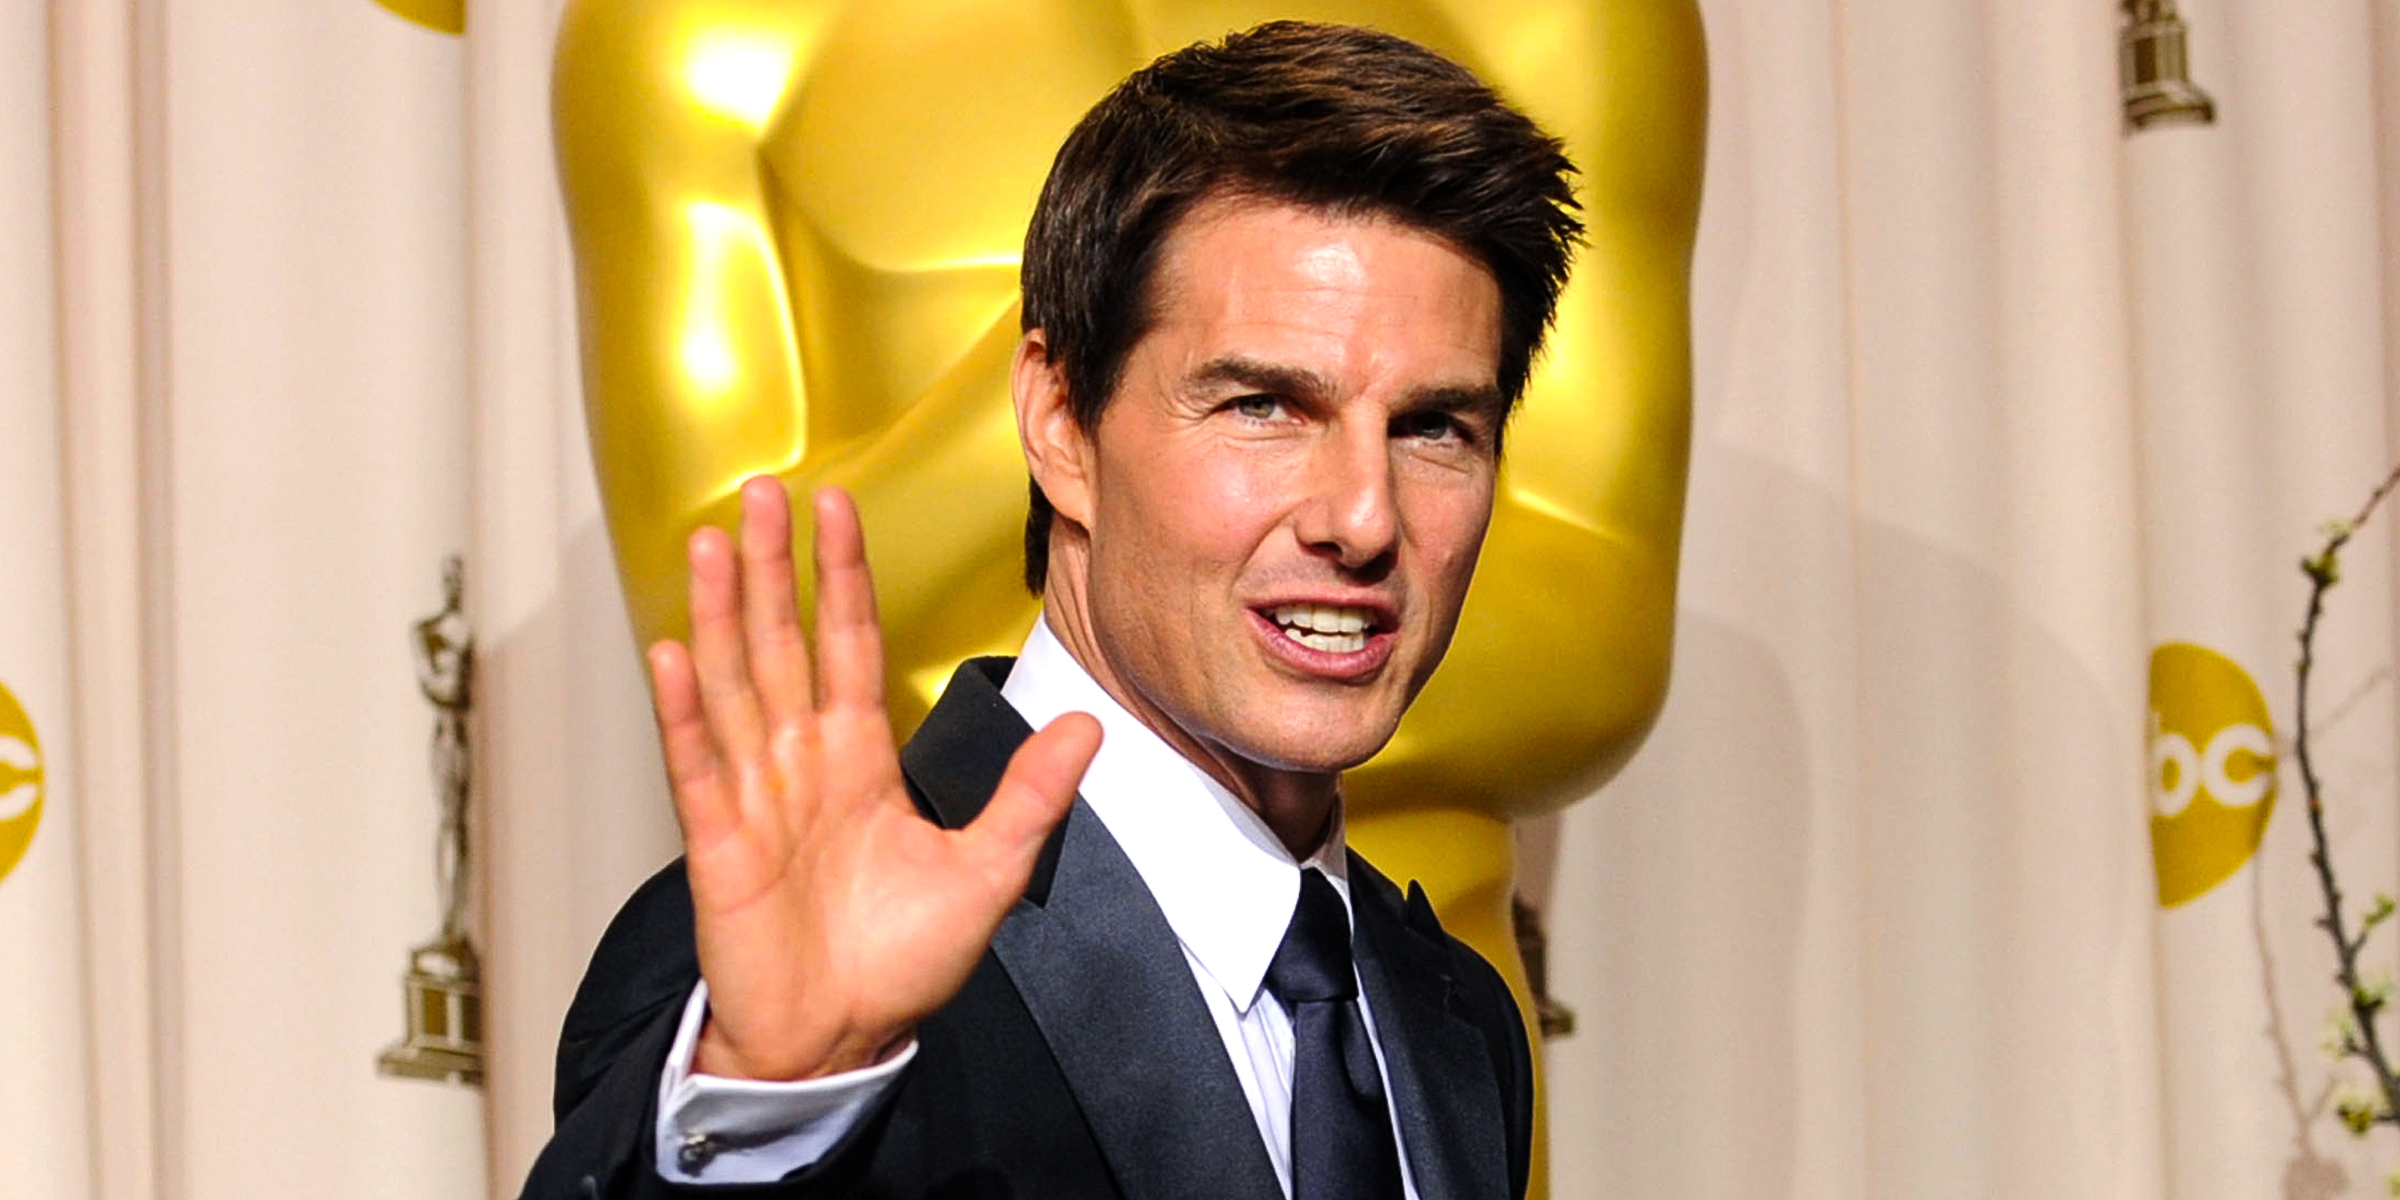 Tom Cruise | Foto: Getty Images